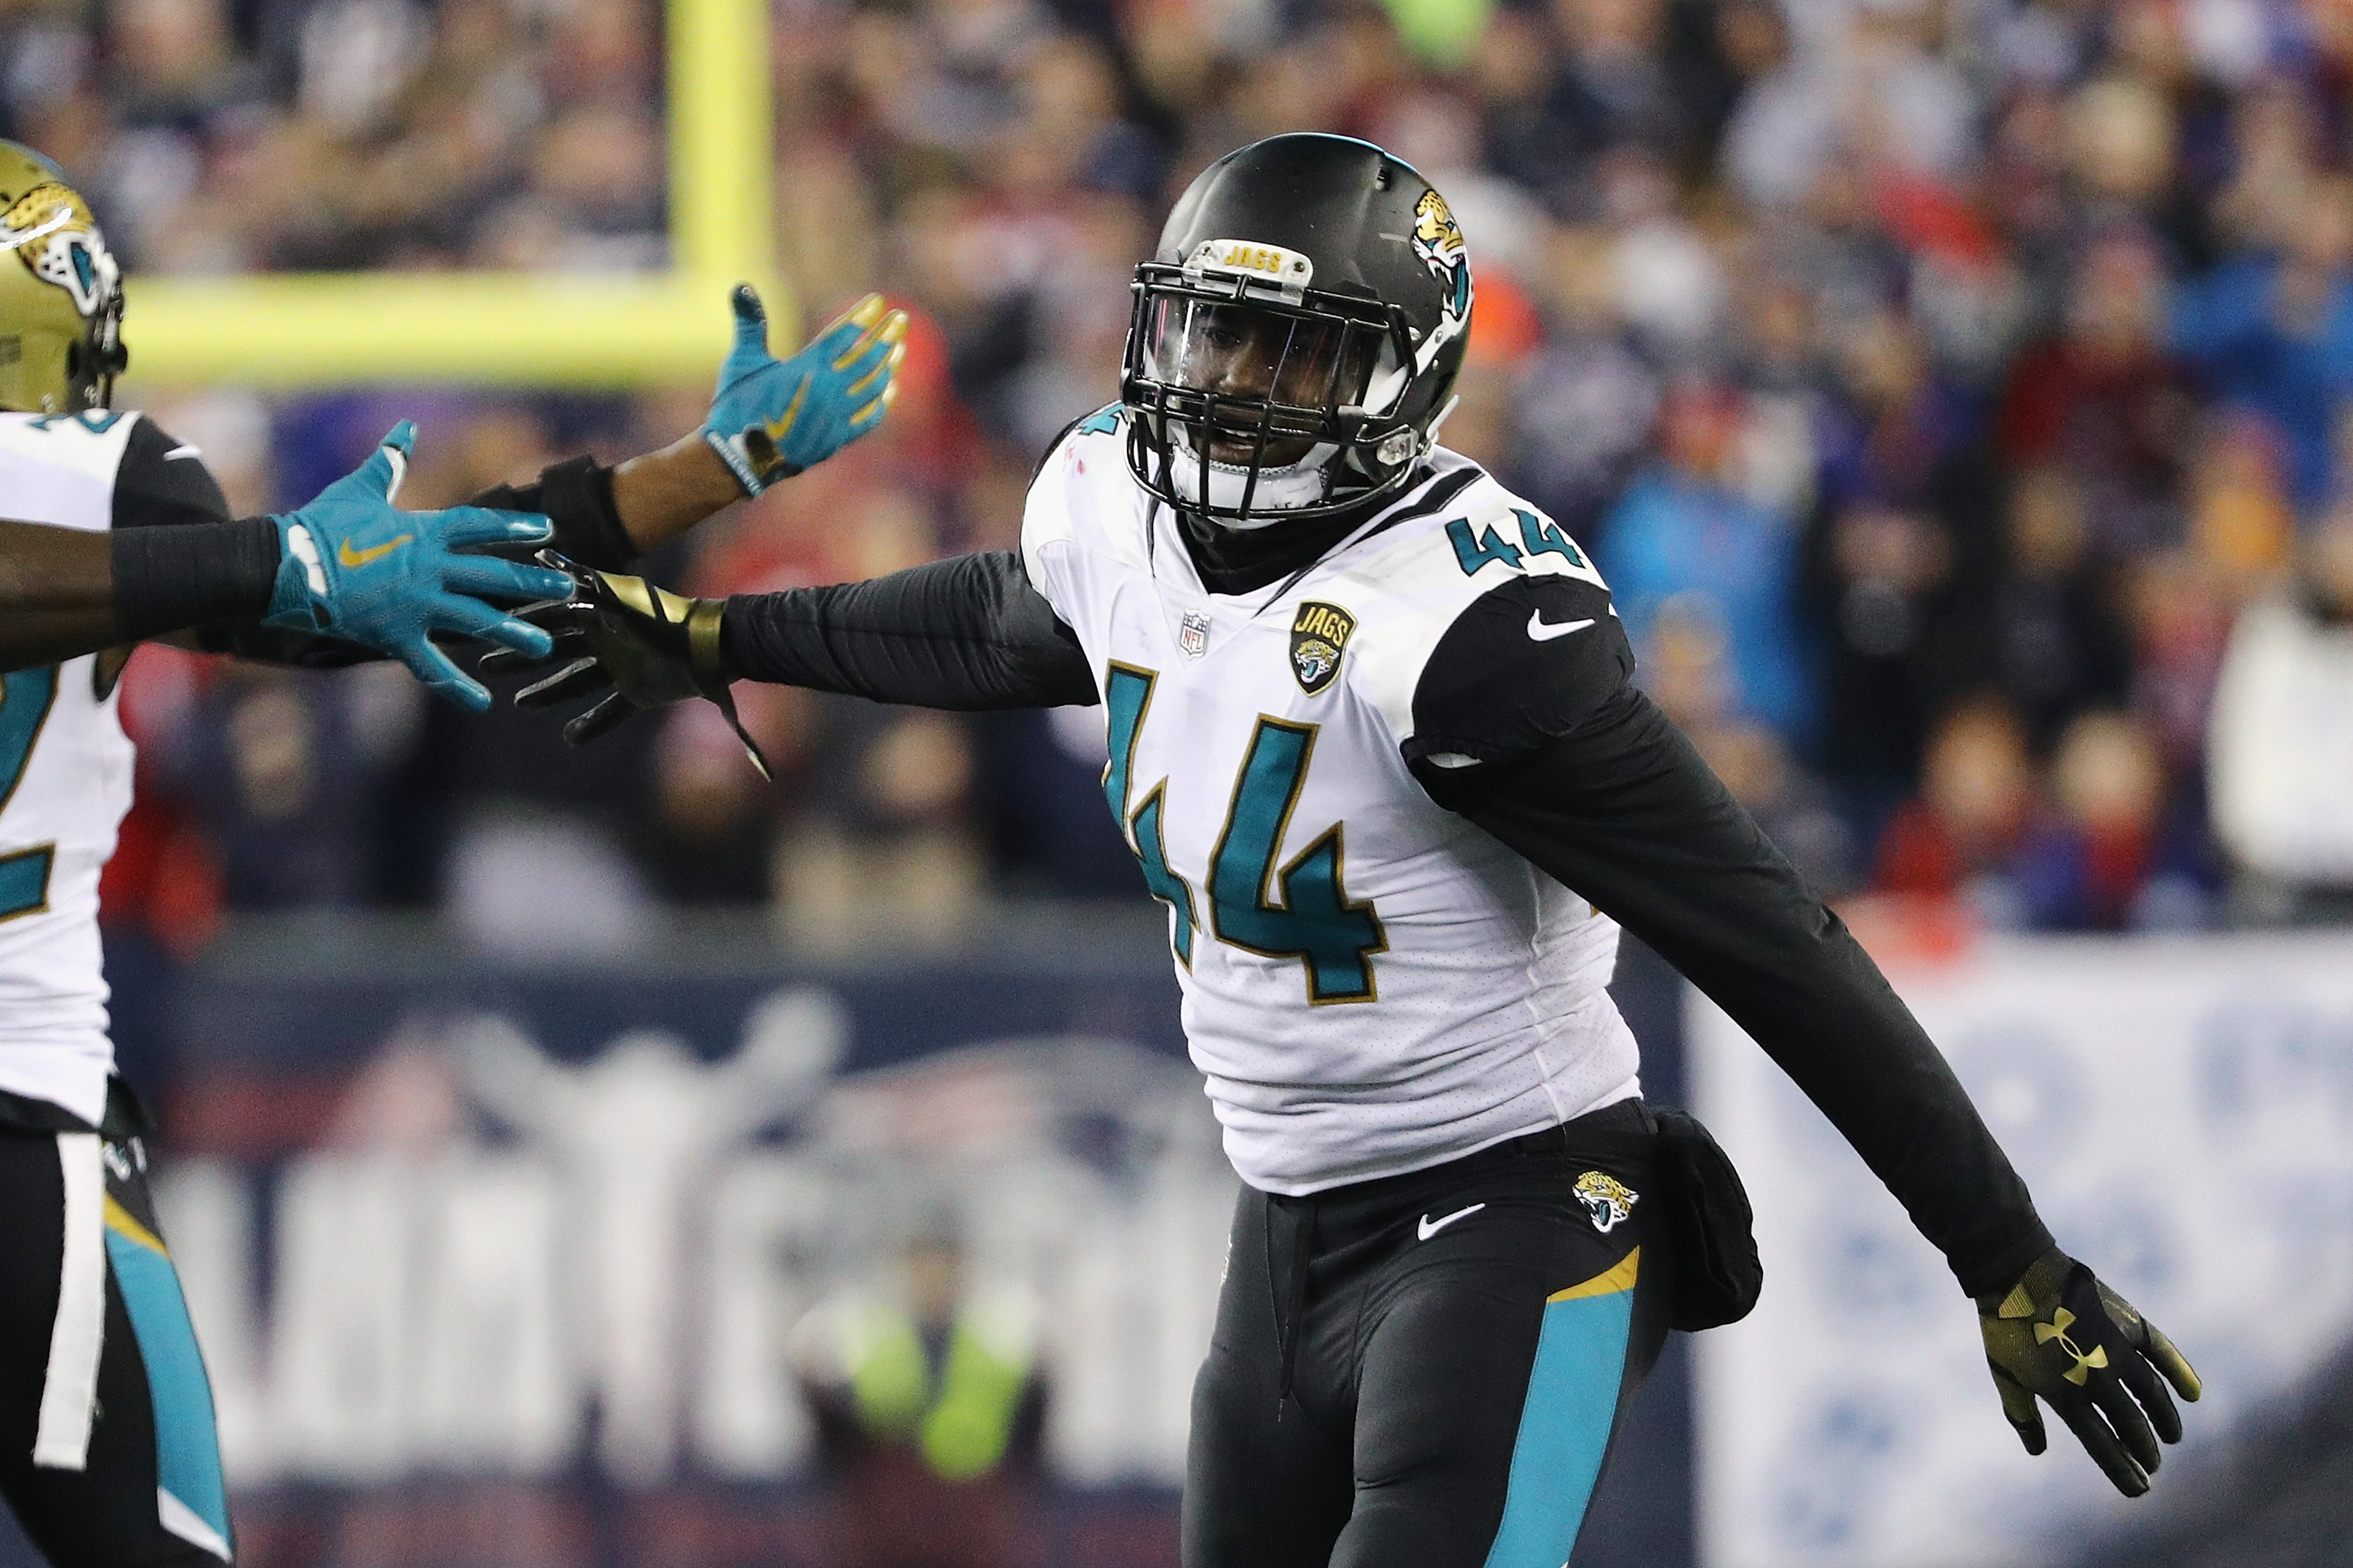 The Jacksonville Jaguars Seek a Repeat of Their Last Playoff Run, Minus the Quick Whistle